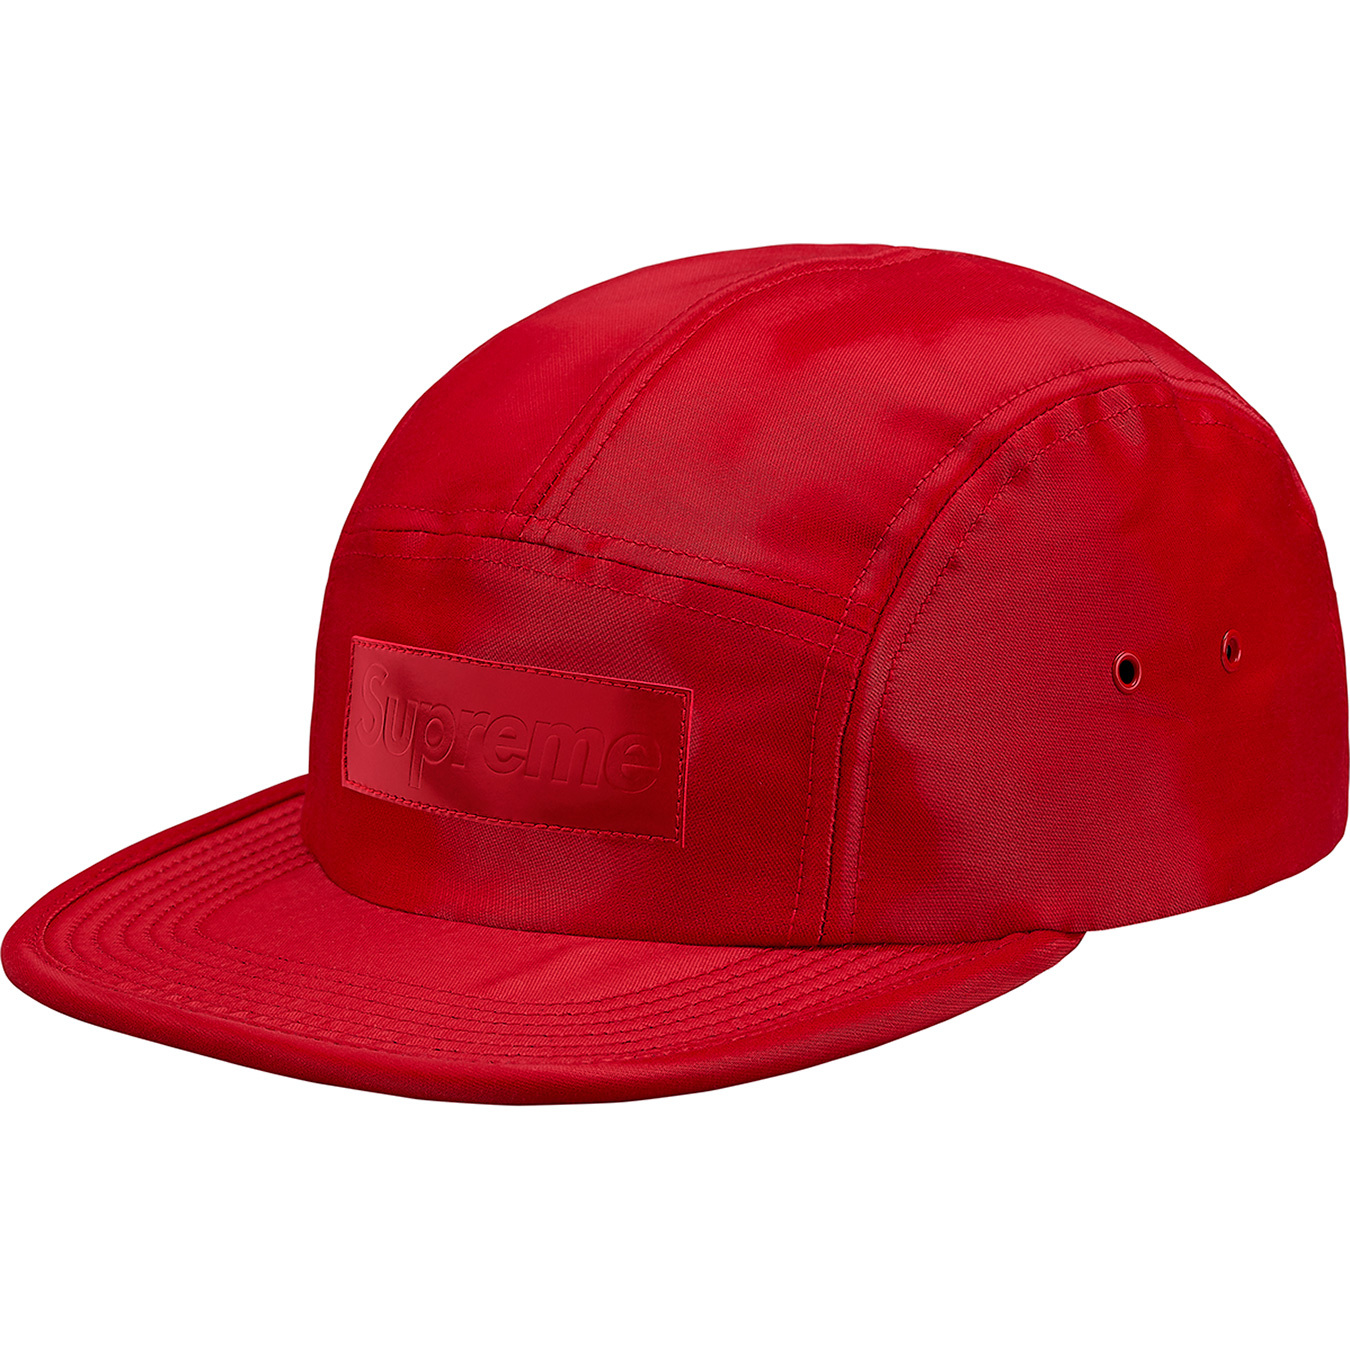 Patent Leather Patch Camp Cap - fall winter 2018 - Supreme